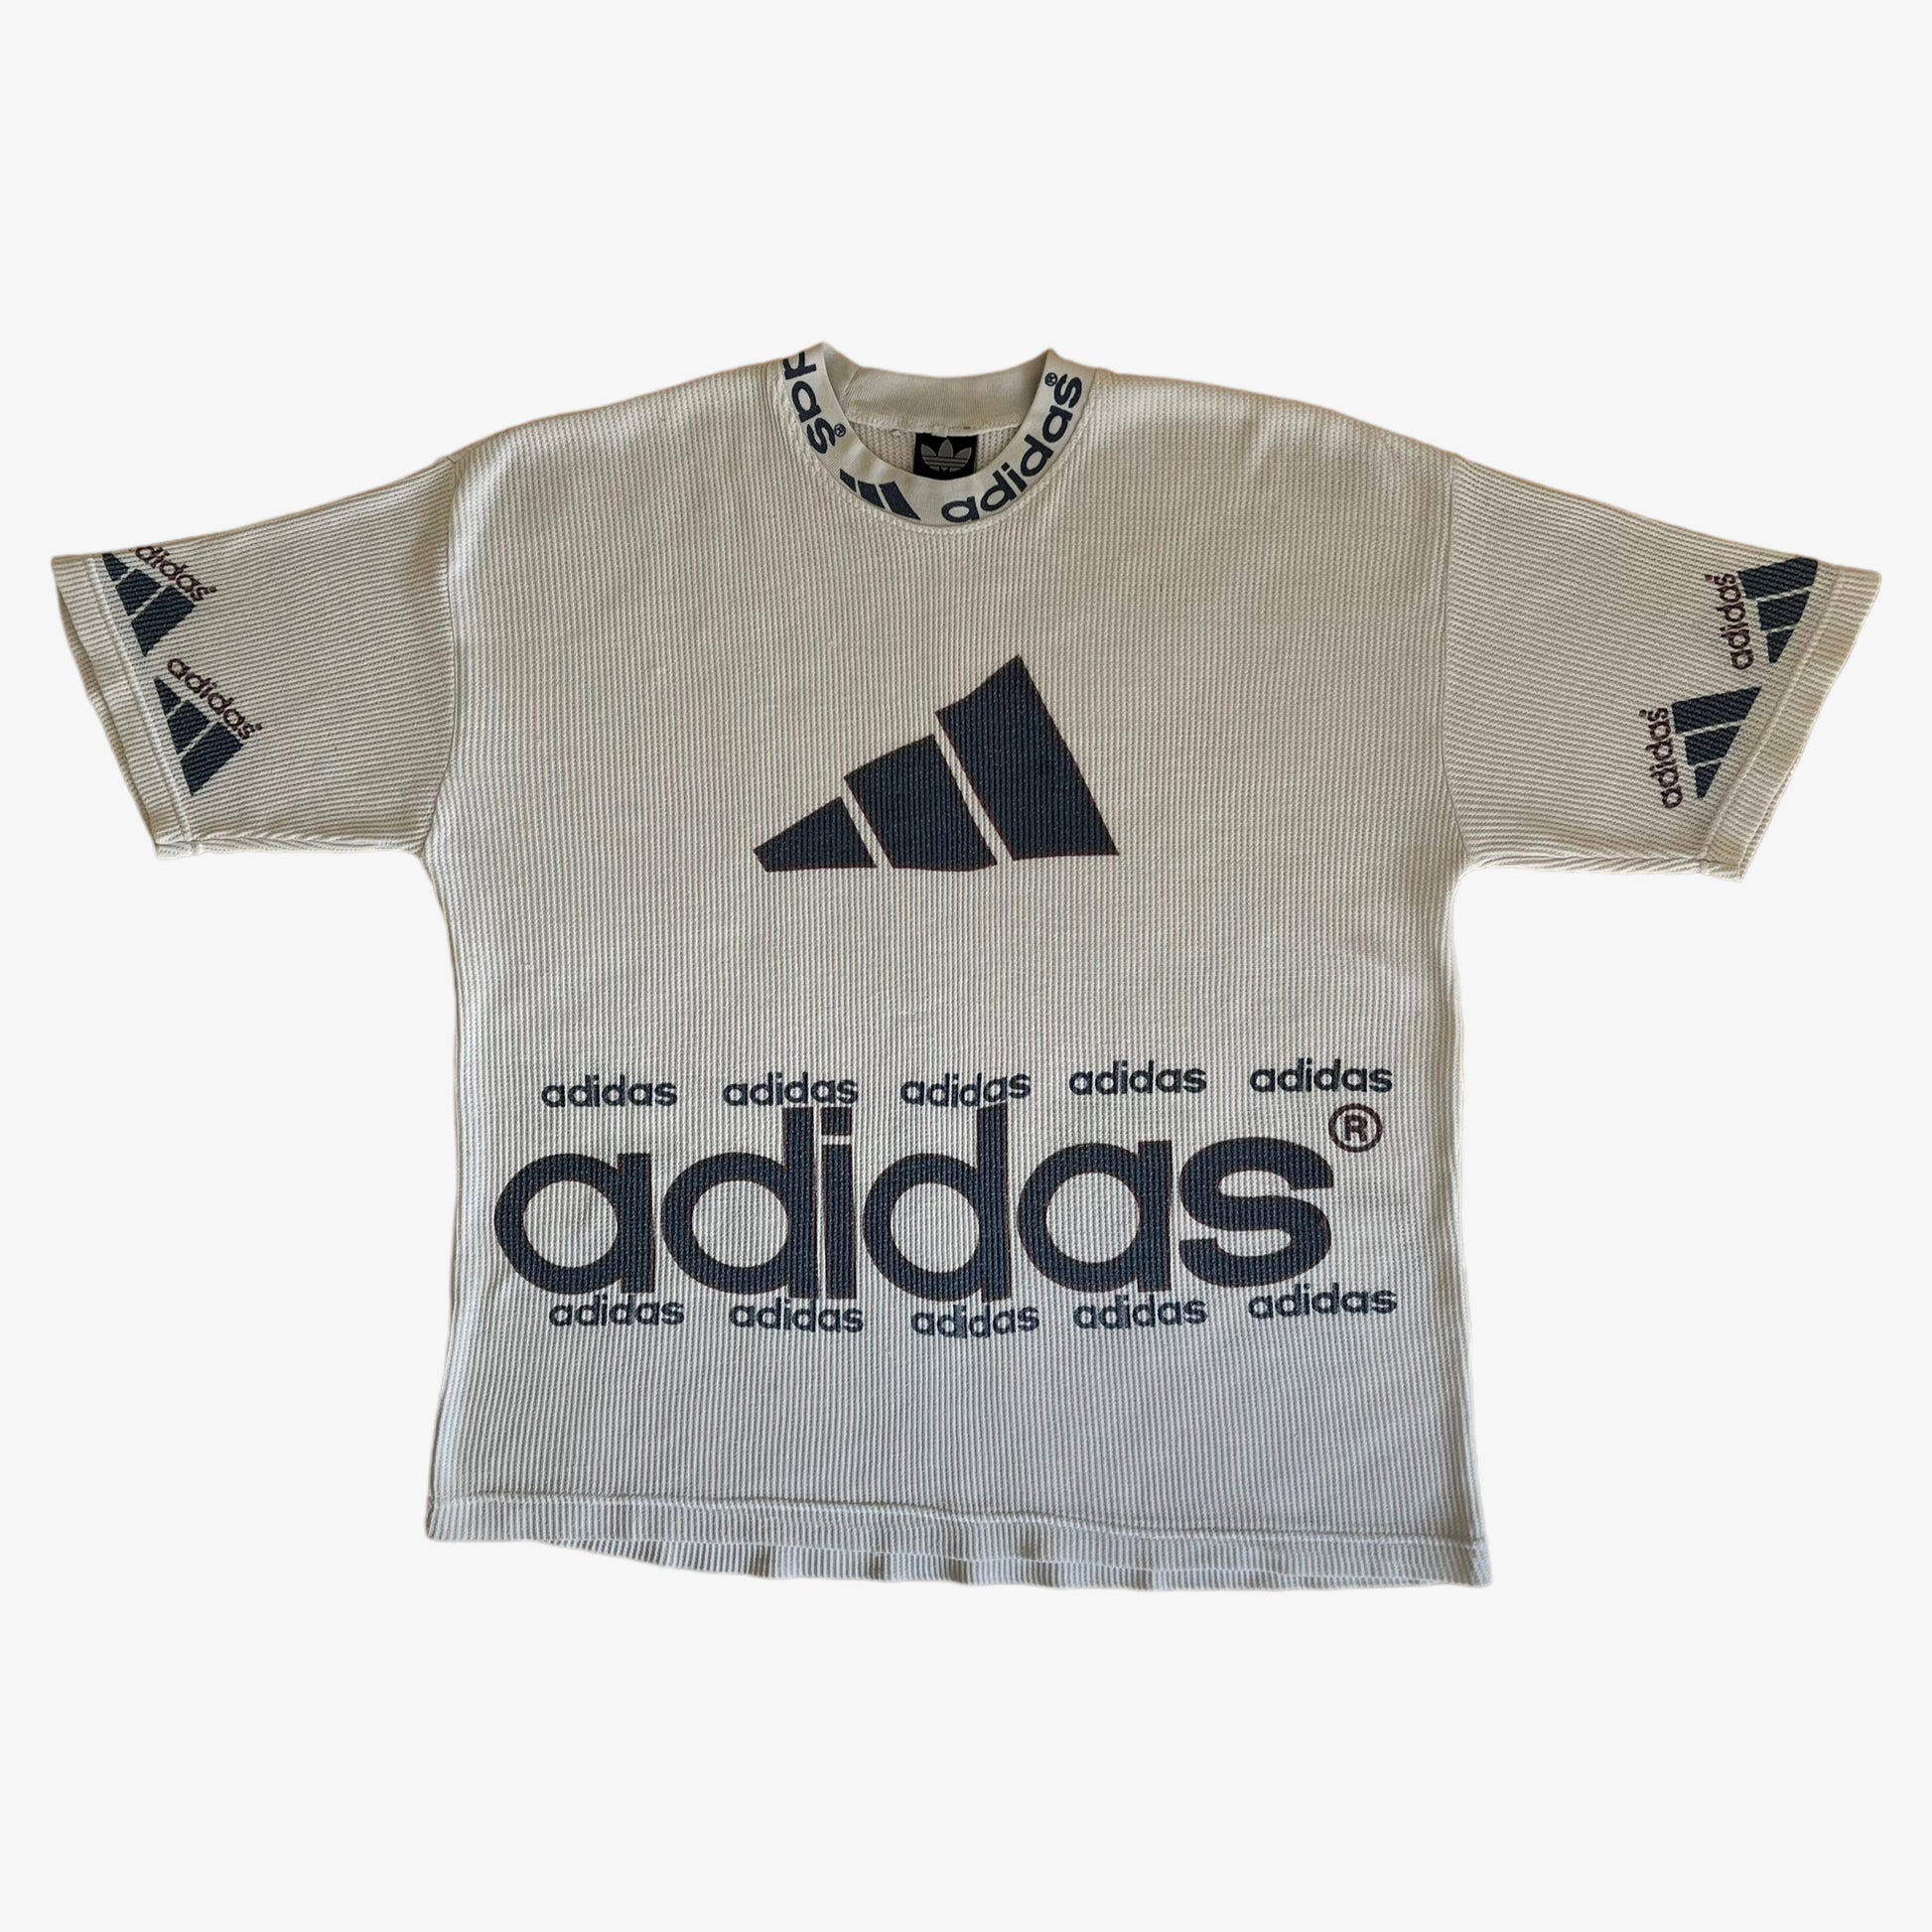 Vintage 90s Adidas All Over Print Spell Out Top - Casspios Dream